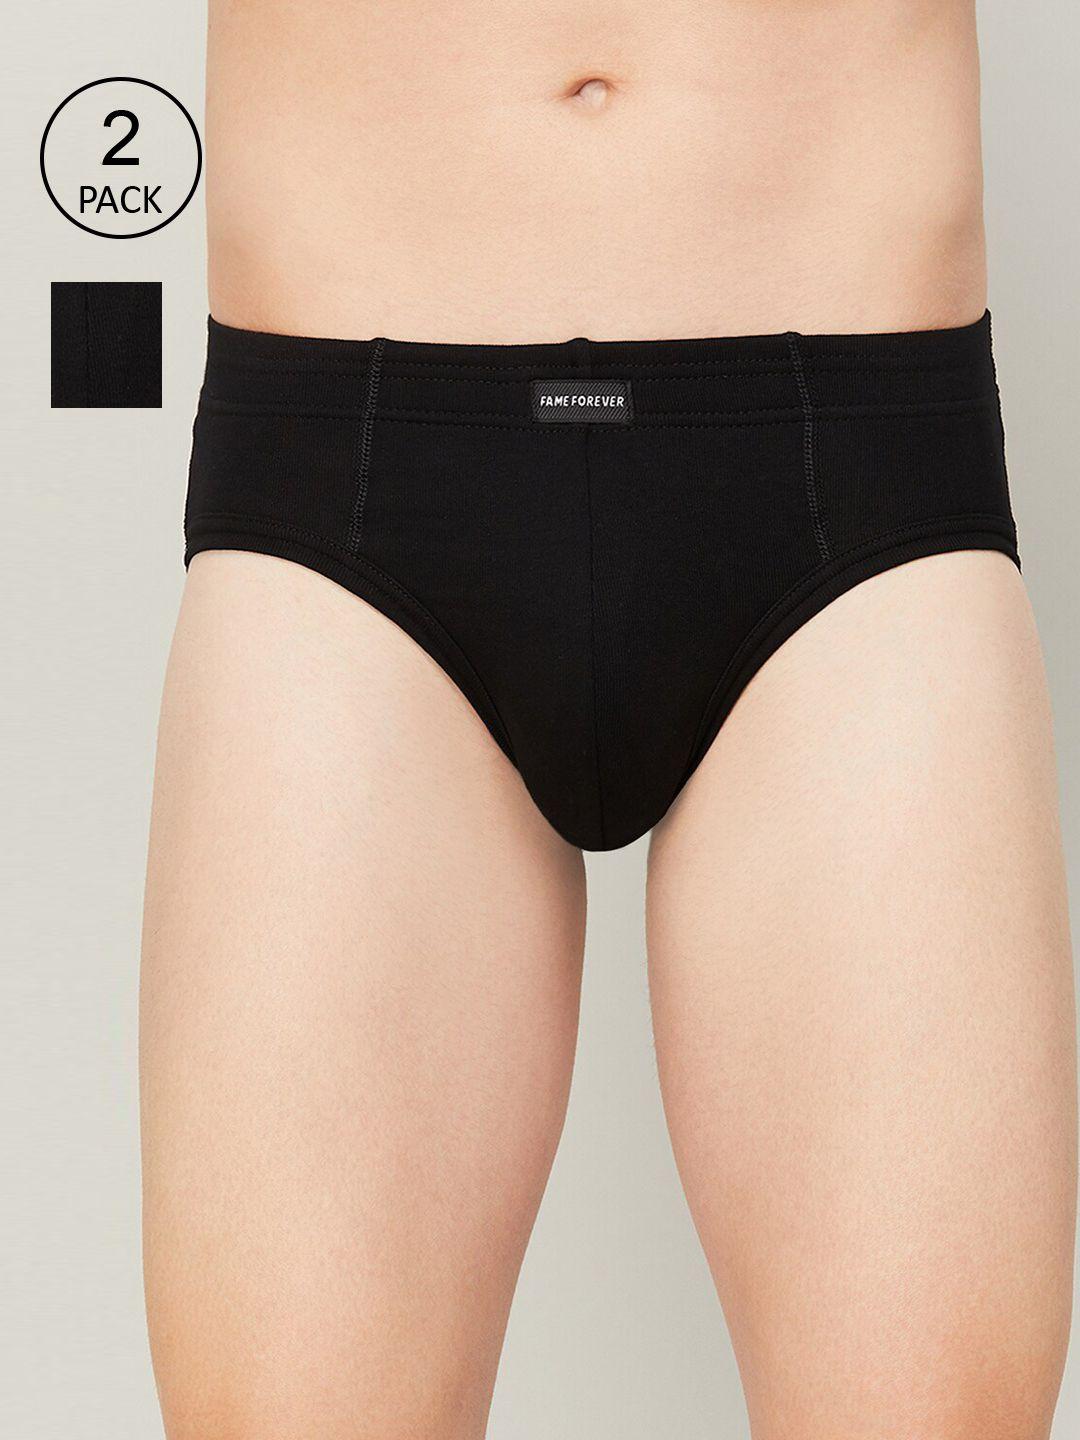 Fame Forever by Lifestyle Men Pack of 2 Black Cotton Basic Briefs